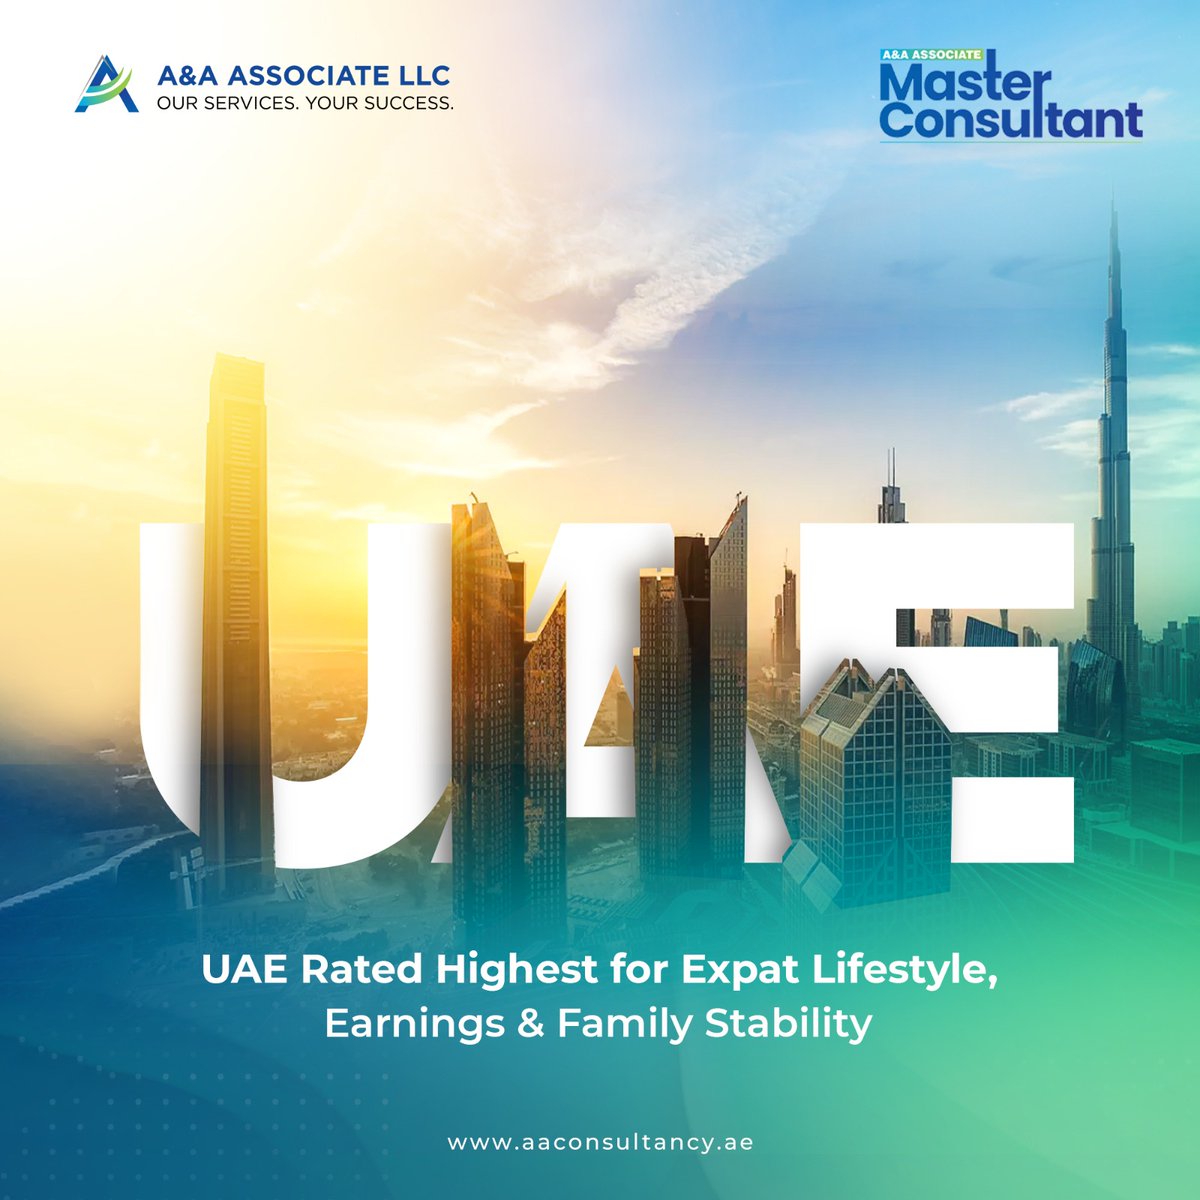 The UAE is the most popular destination for expatriates as the emirate rated highest for expat lifestyle, earnings and family stability, according to a survey.
.
.
.
.
.
.

#UAE #ExpatLife #ExpatsinUAE #MyDubai #AbuDhabi #DubaiLife #FamilyStability #EarnMoreLiveBetter